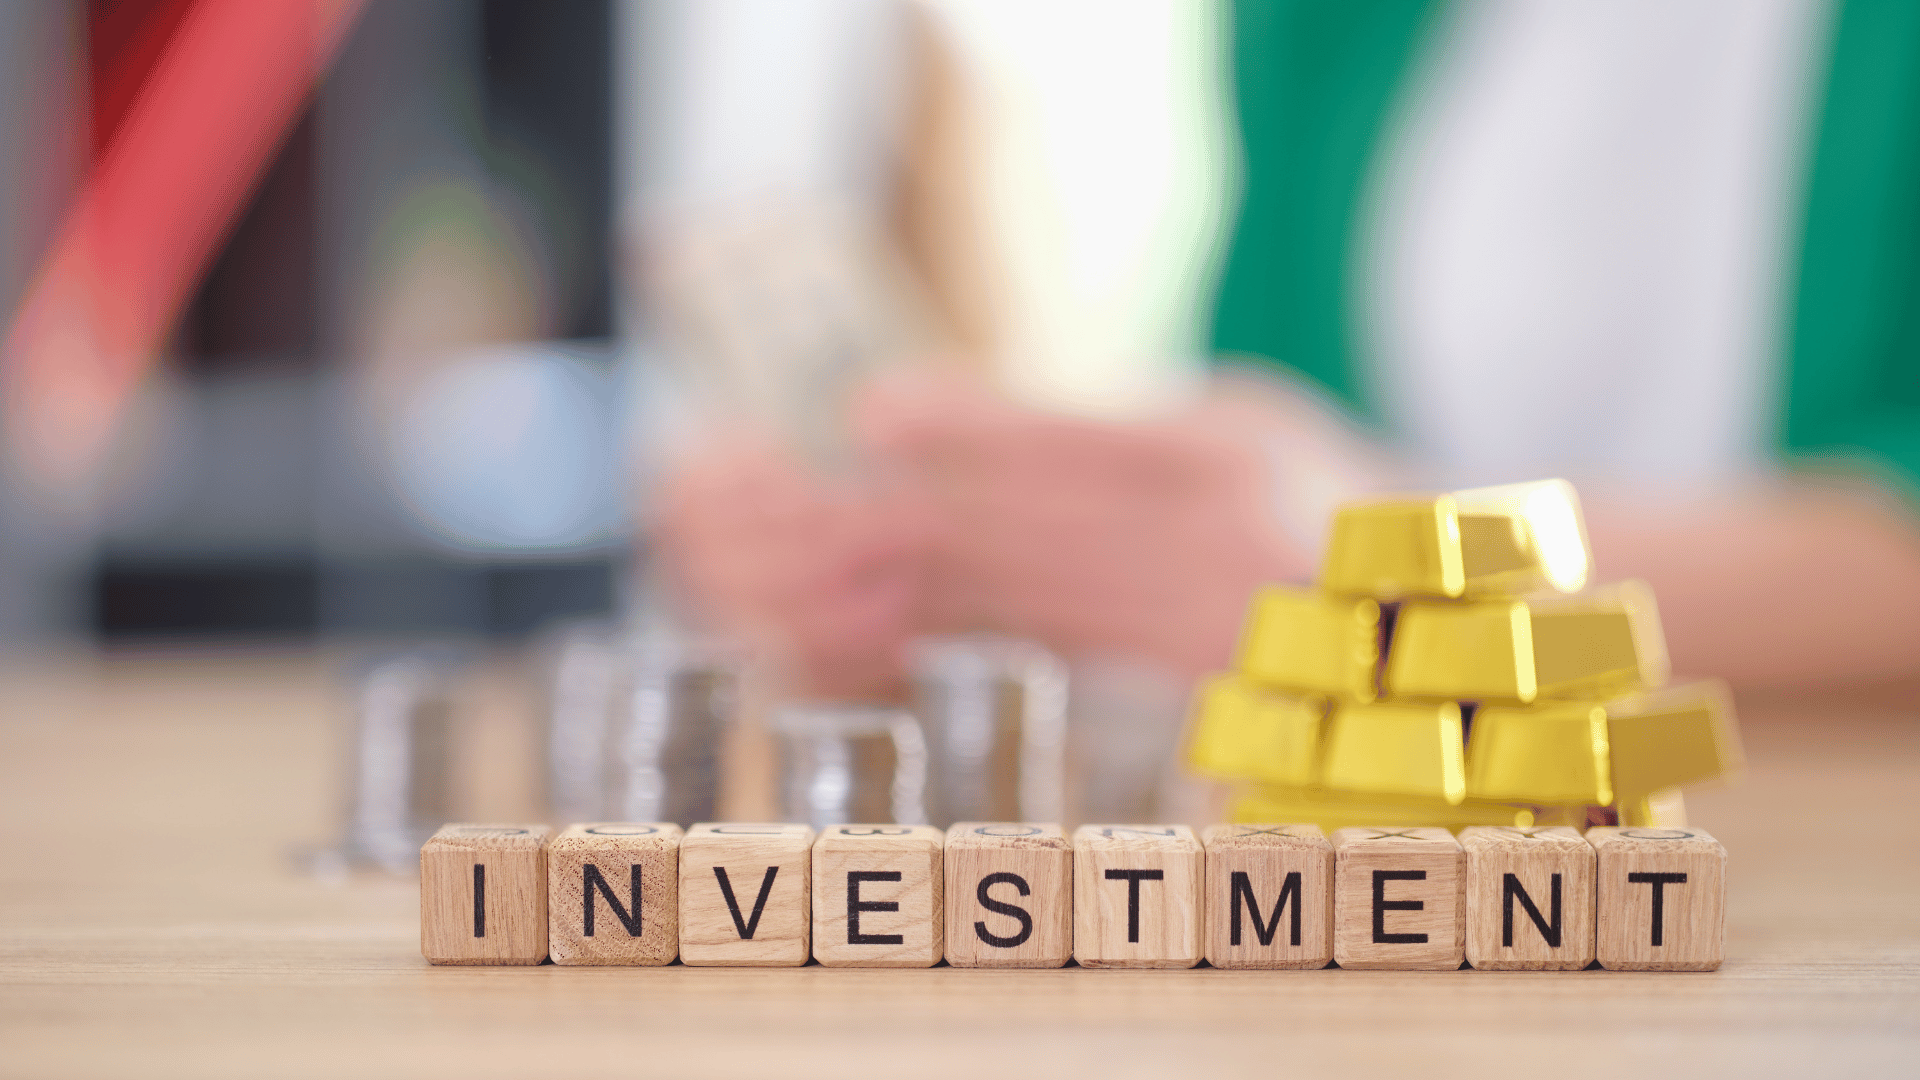 Investing 102: Guide for Growing Wealth and Financial Security